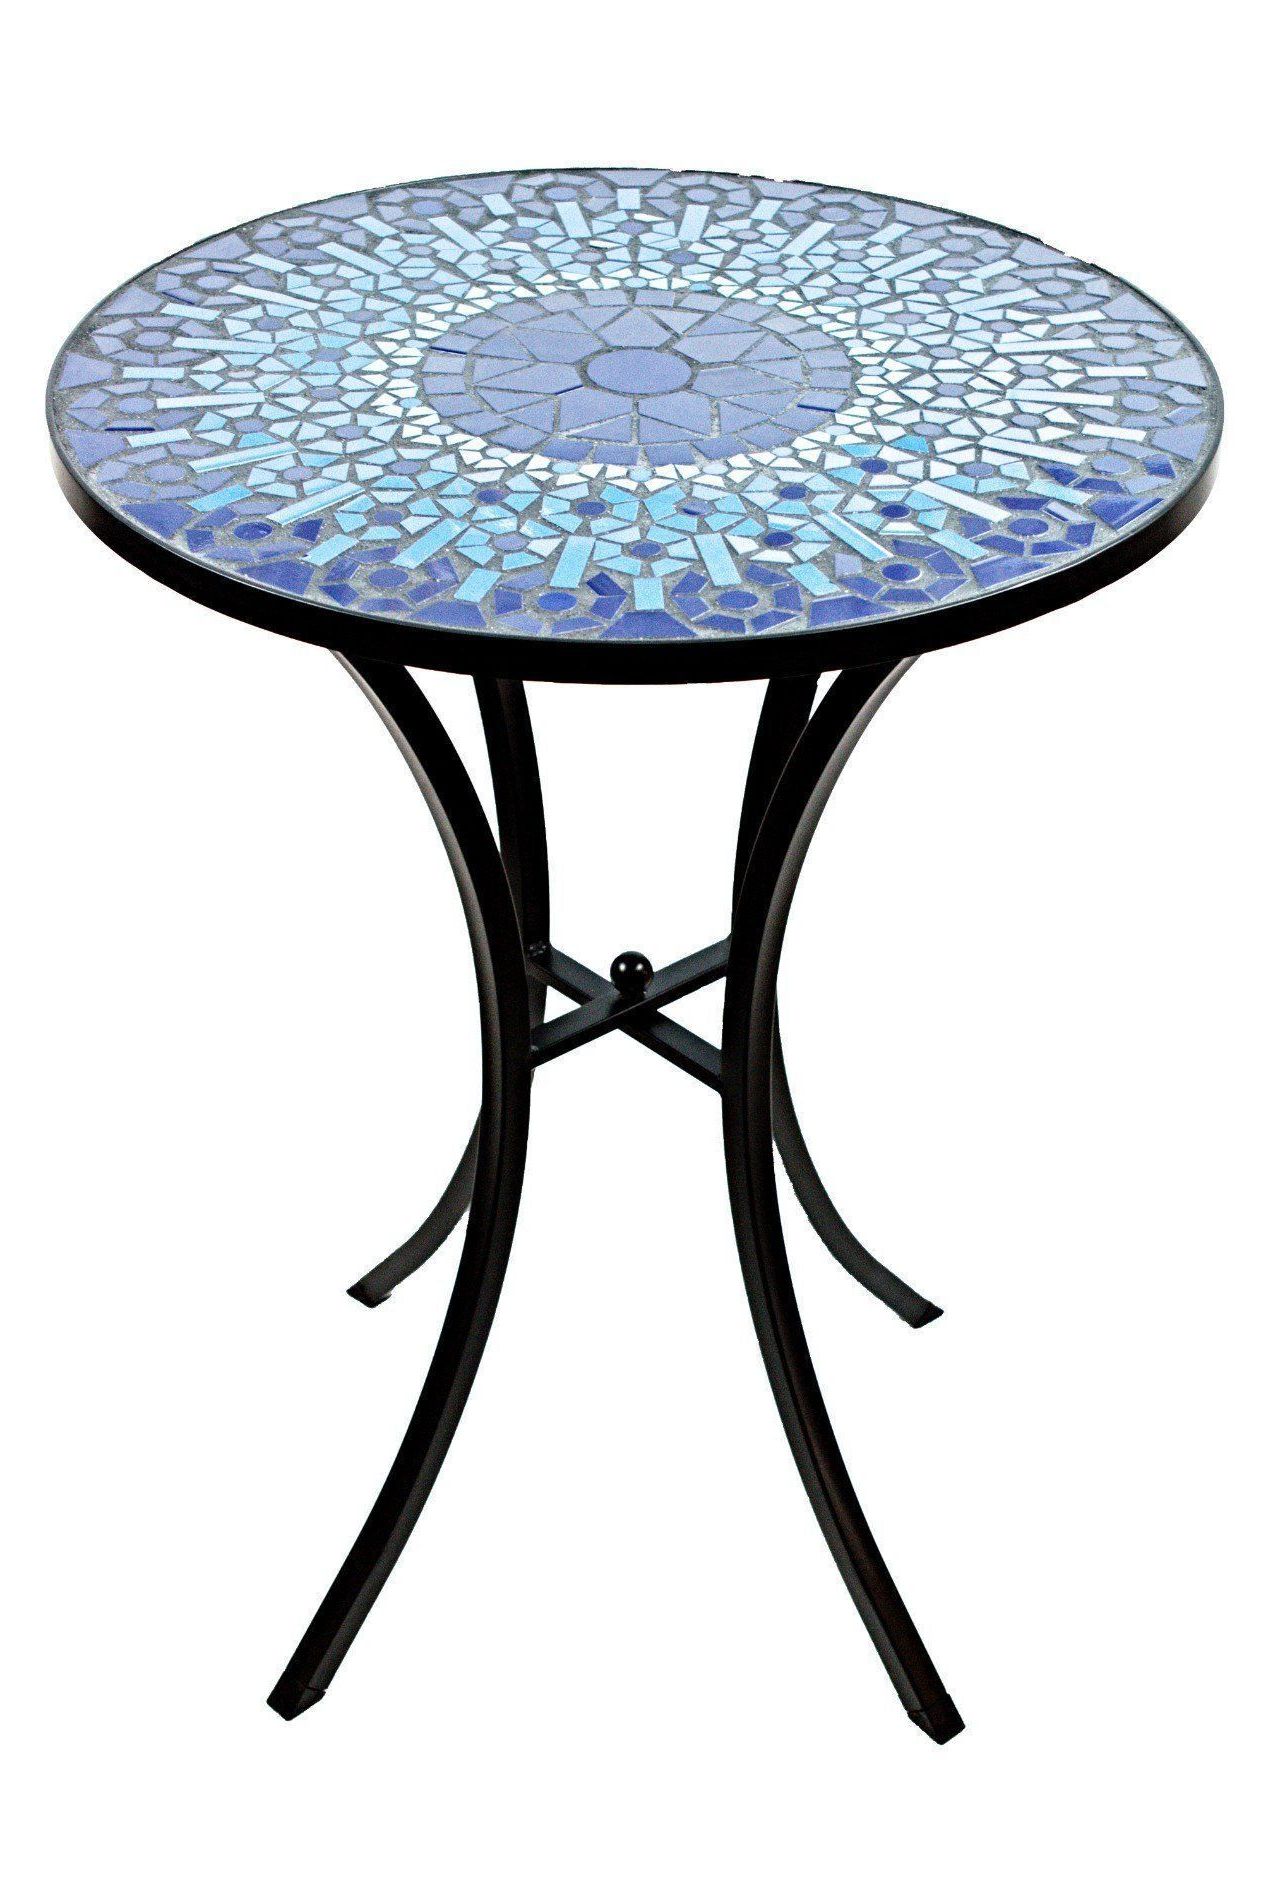 Preferred Green Mosaic Outdoor Accent Tables Throughout Mosaic Accent Table (View 1 of 15)